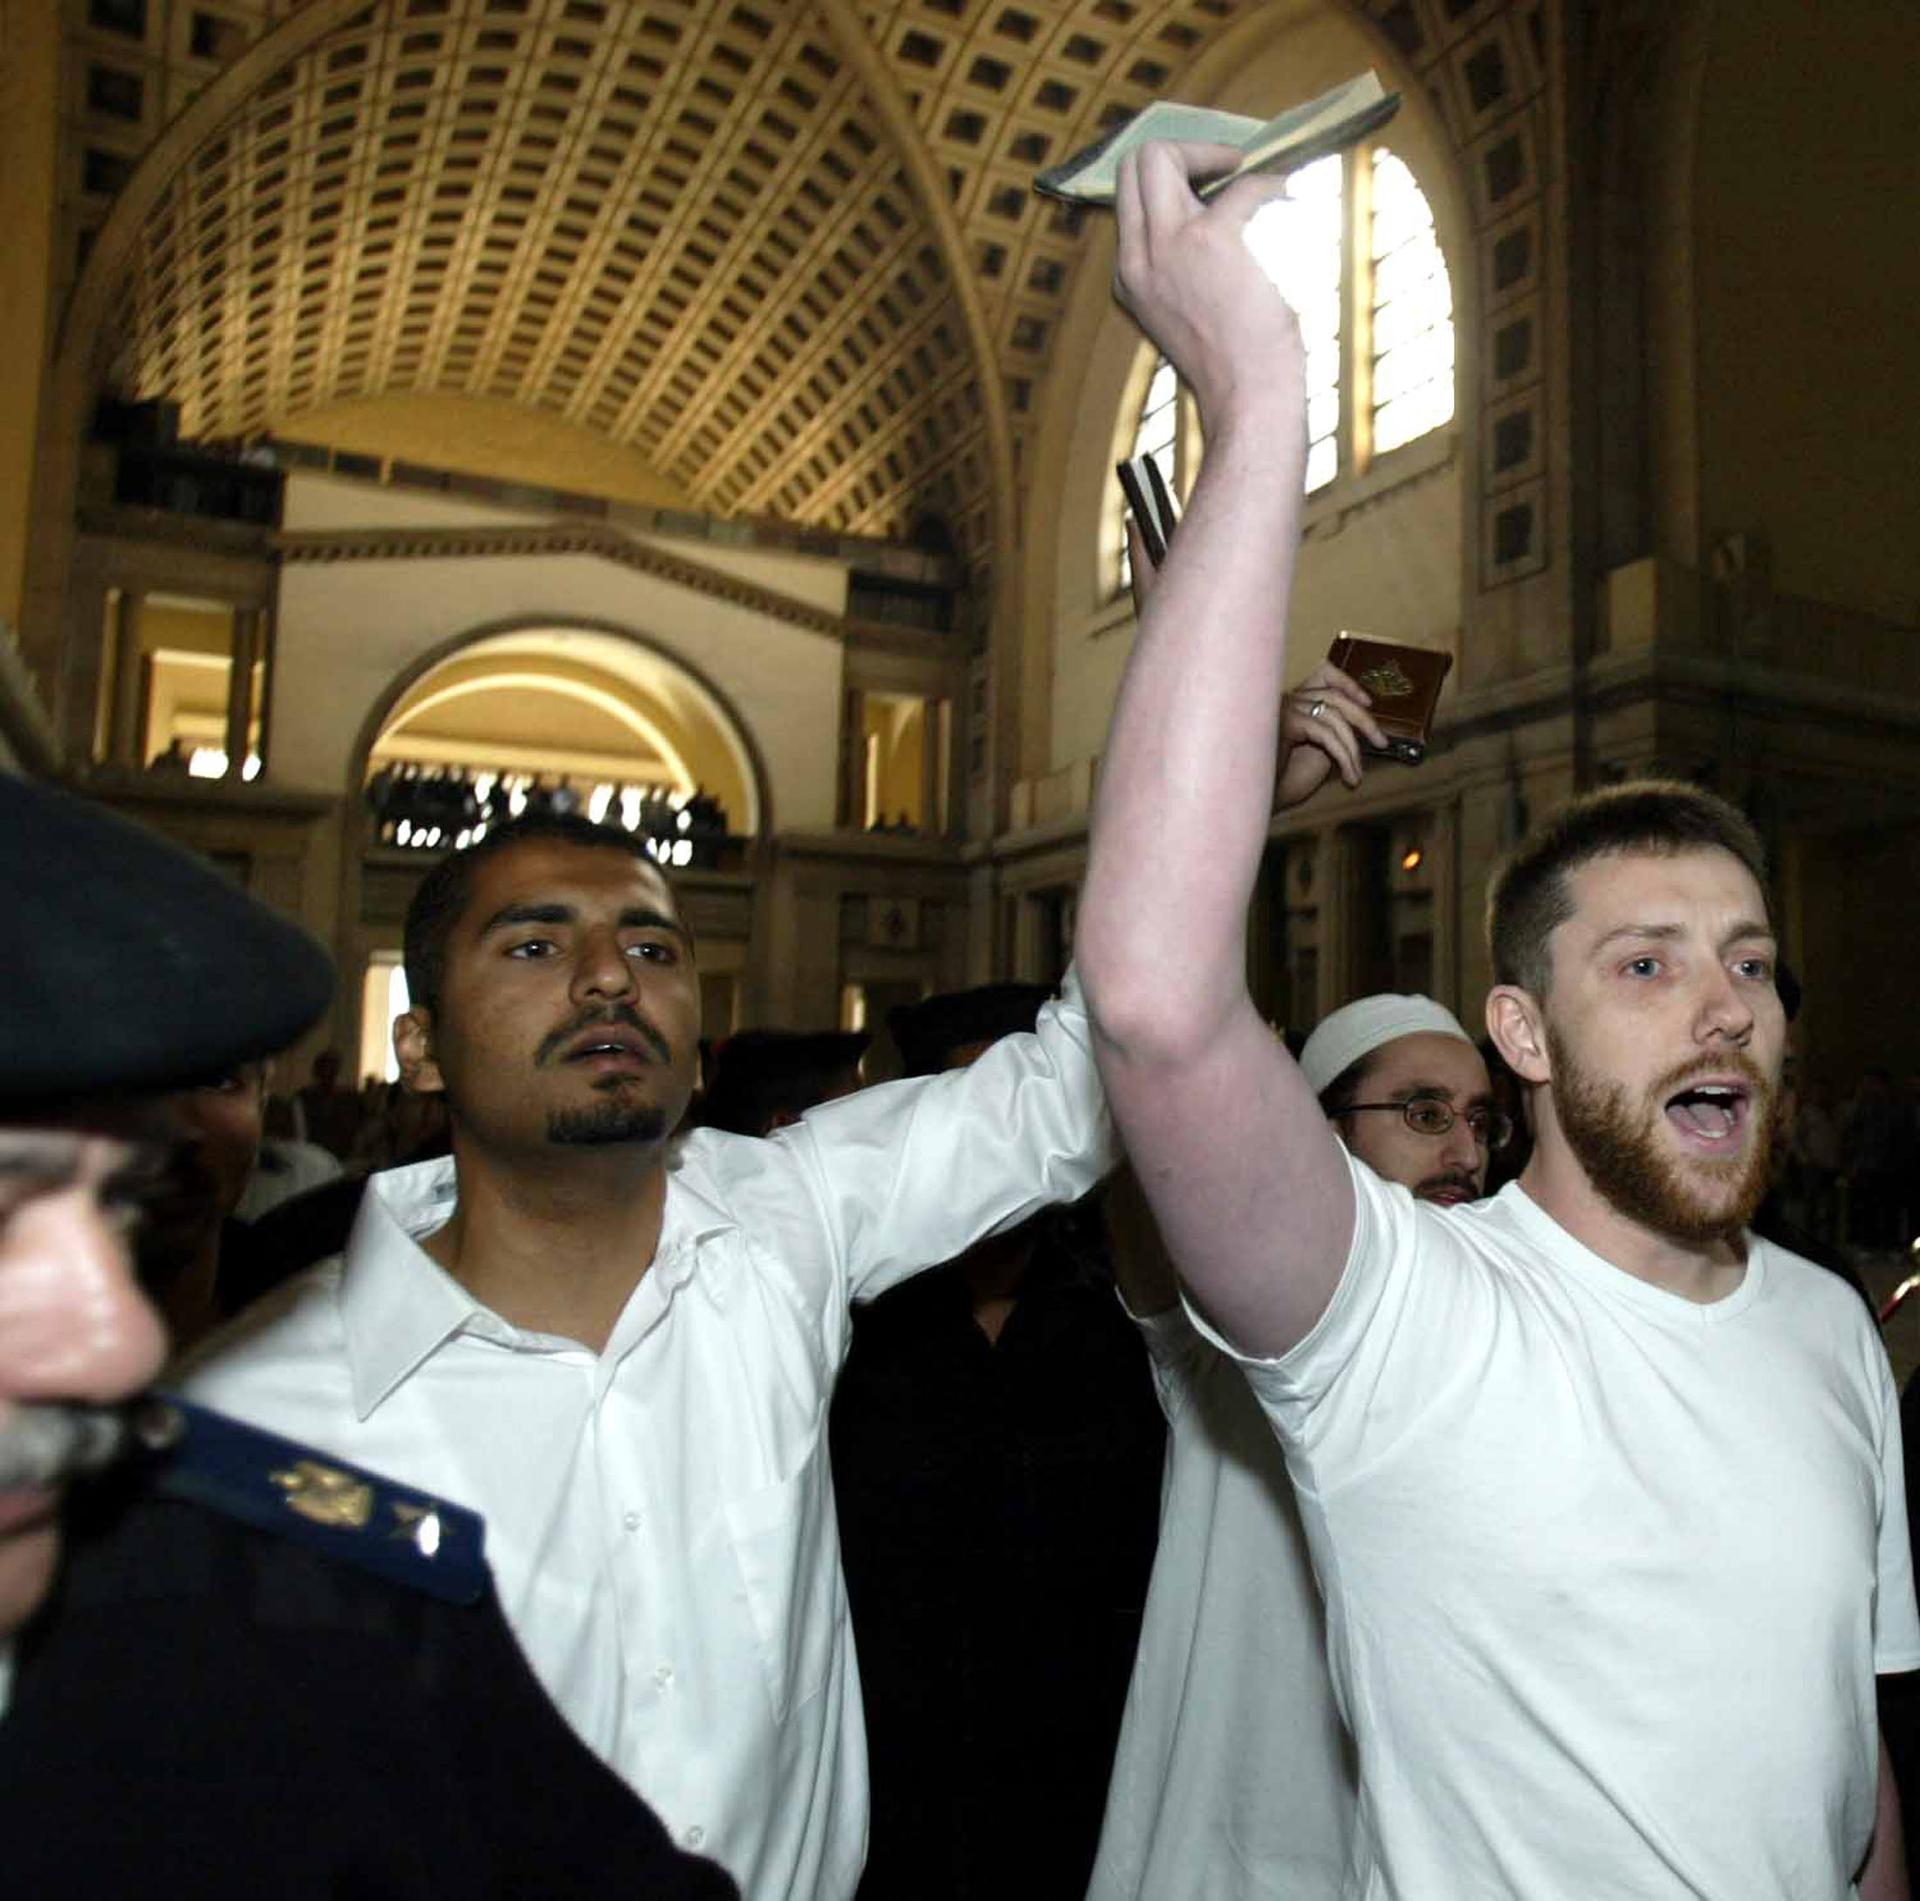 Maajid Nawaz (left) and fellow British citizen Ian Nisbet hold up copies of the holy Quran as they are led to court in Cairo, Egypt in March 2004. Nawaz and Nisbet were among a group of 26 people arrested in Egypt and sentenced to jail time for promoting